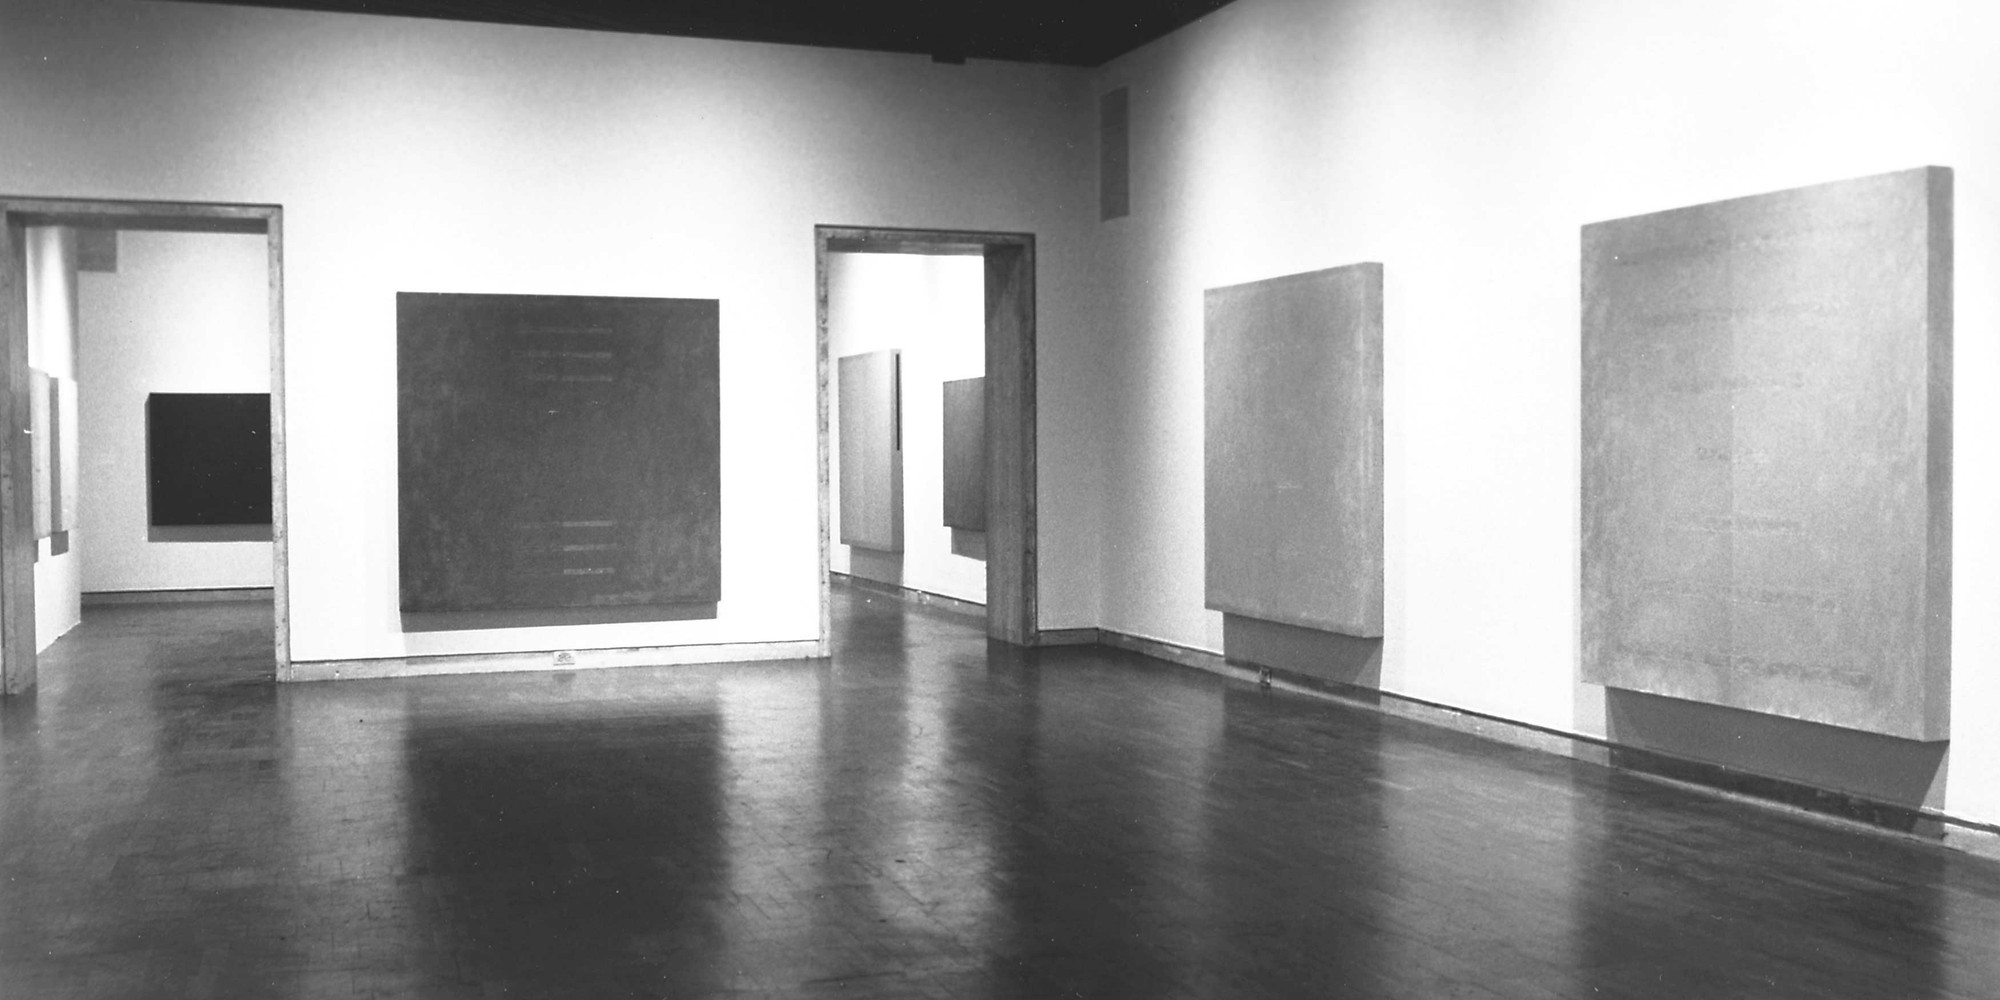 Installation view of César Paternosto Paintings 1969–1980, Center for Interamerican Relations (The America’s Society), New York, September 1981. The Hidden Order was exhibited in this exhibition. Image courtesy of Cecilia de Torres Gallery